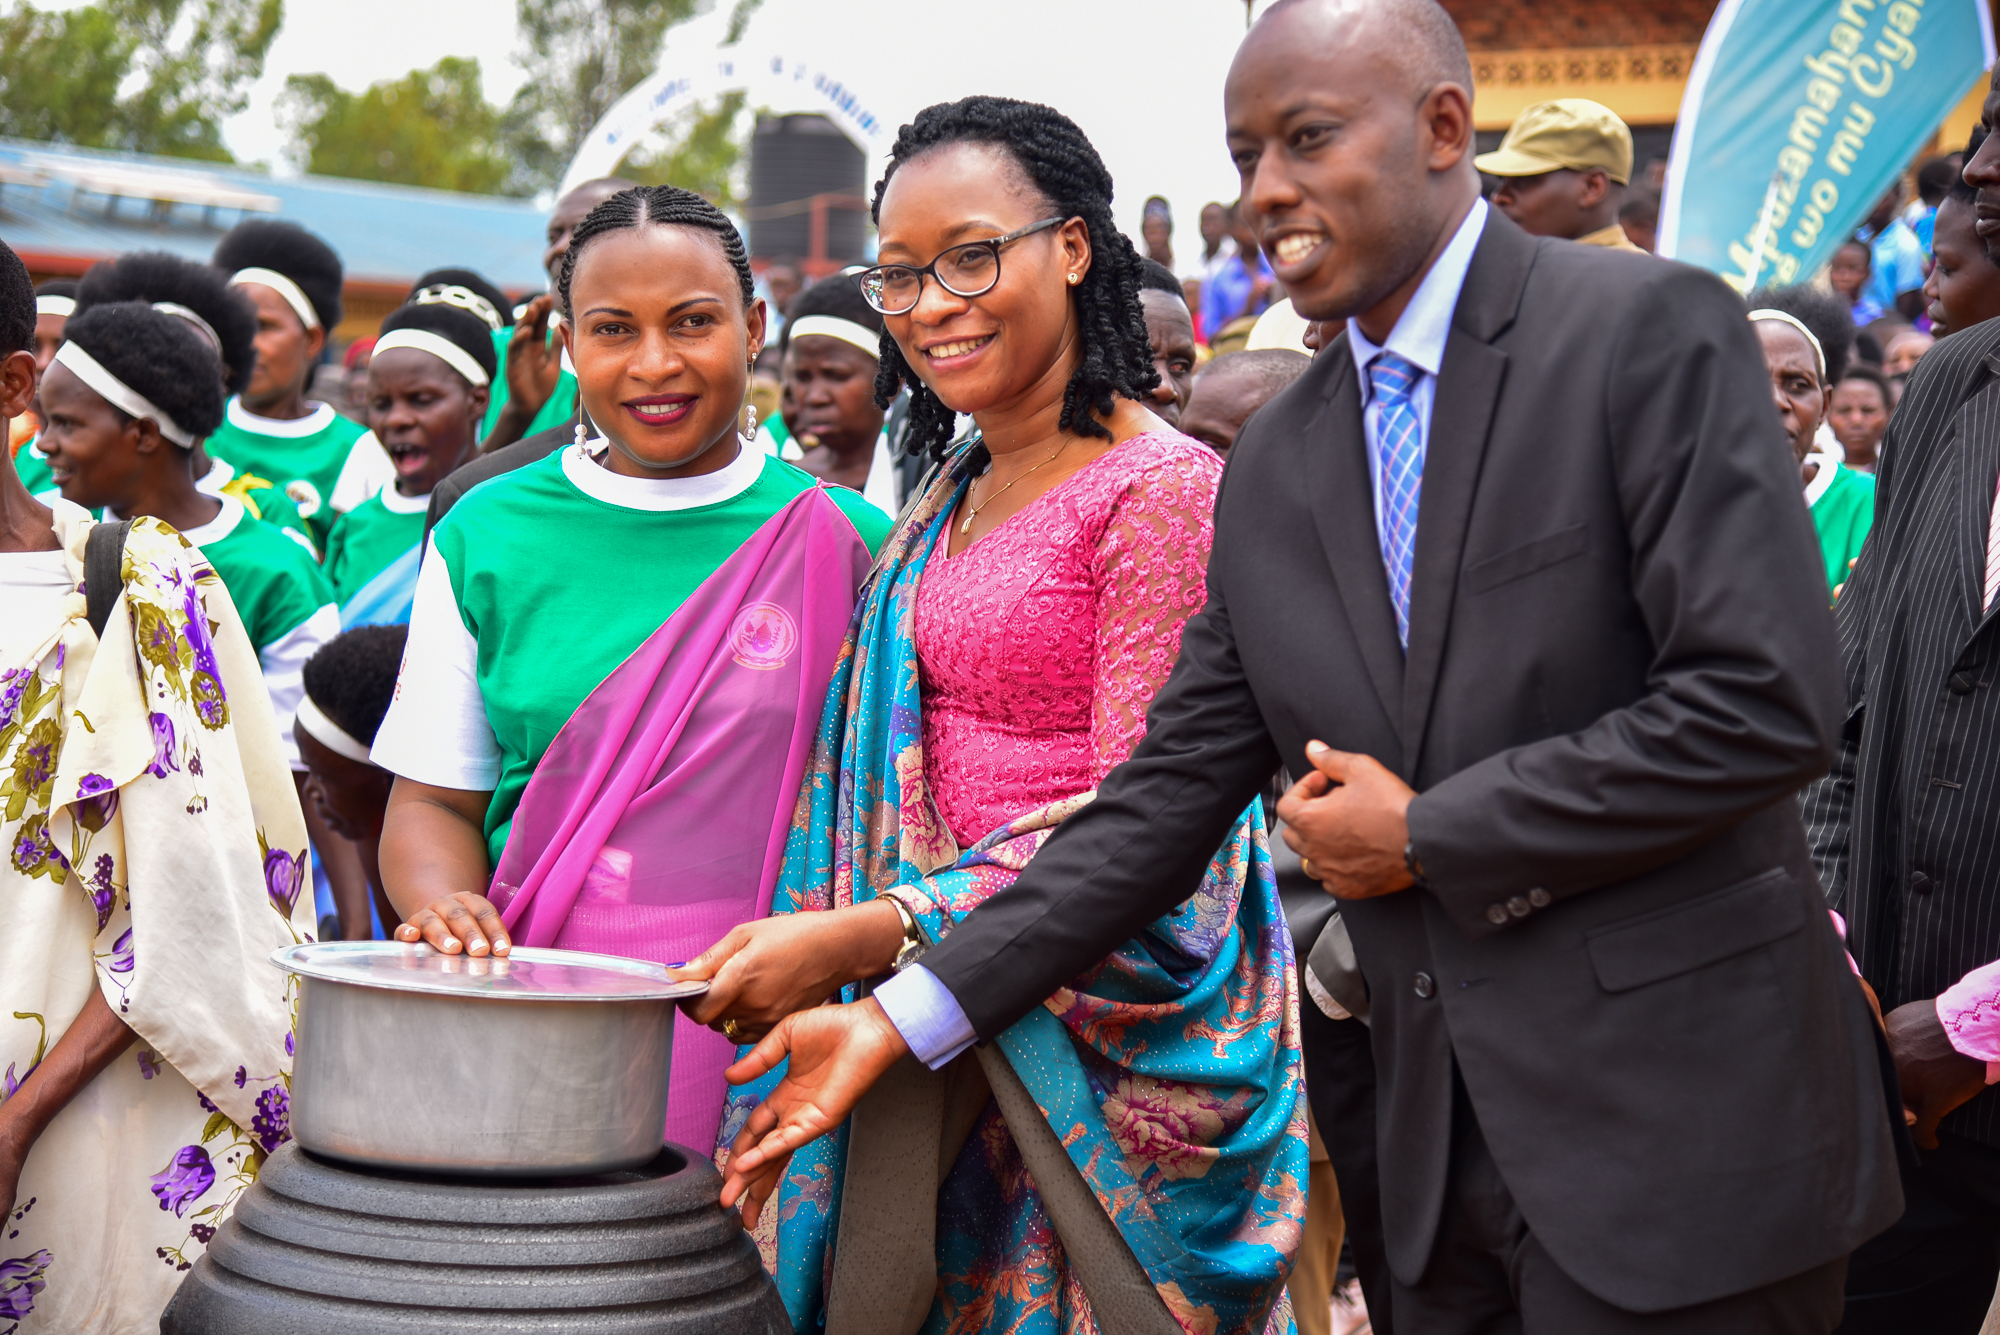 Prof. Bayisenge, Rwanda’s Minister of Gender and Family Promotion (center), and Sebutege Ange, the Mayor of Huye district (right) present an energy saving cooking kit to a beneficiary at the International Rural Women’s Day celebration. Photo: UN Women/James Ochweri